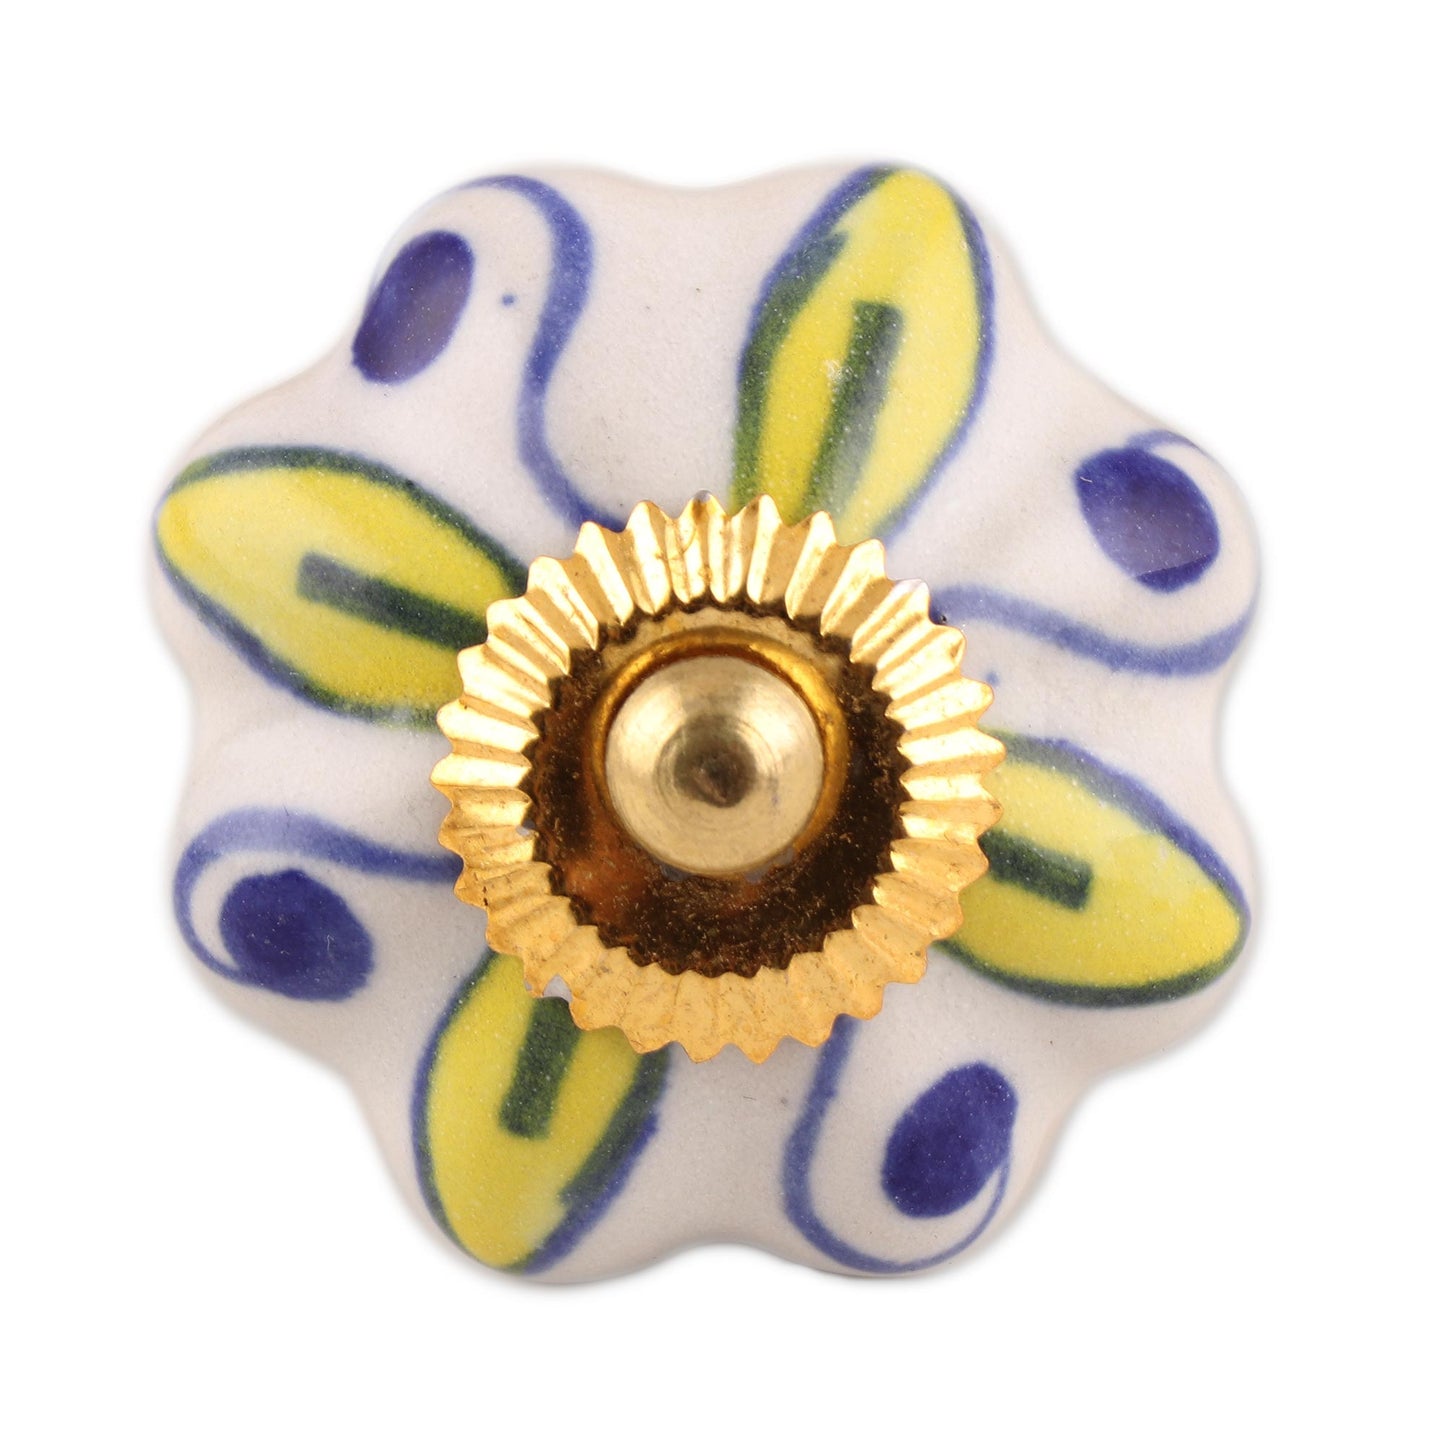 Bright Sunshine Ceramic Cabinet Knobs Floral Yellow White (Set of 6) India